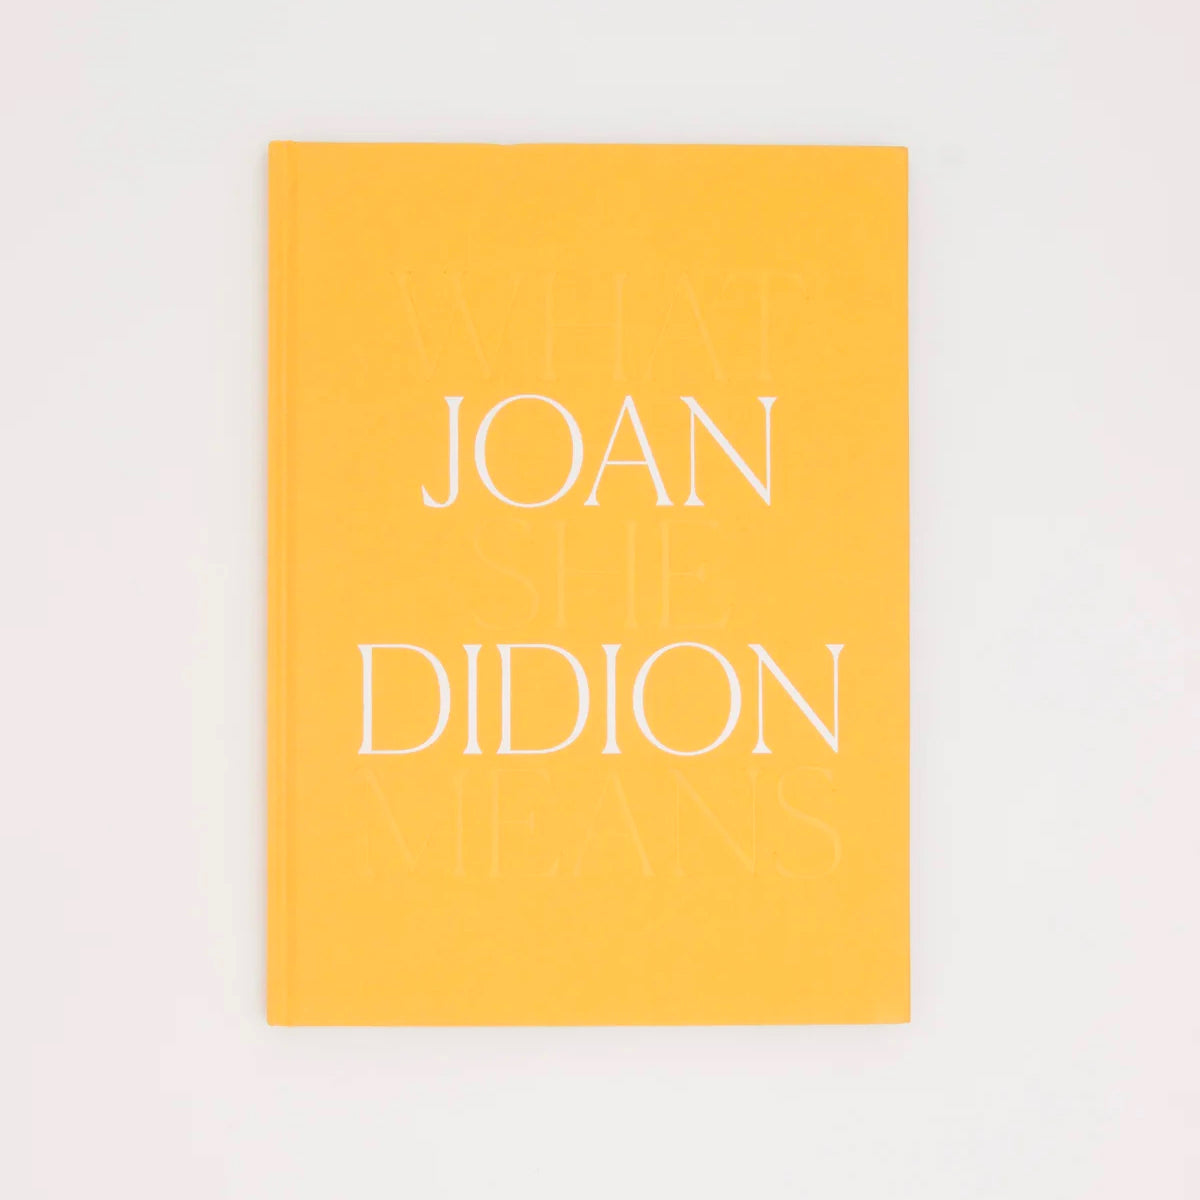 Joan Didion - What She Means